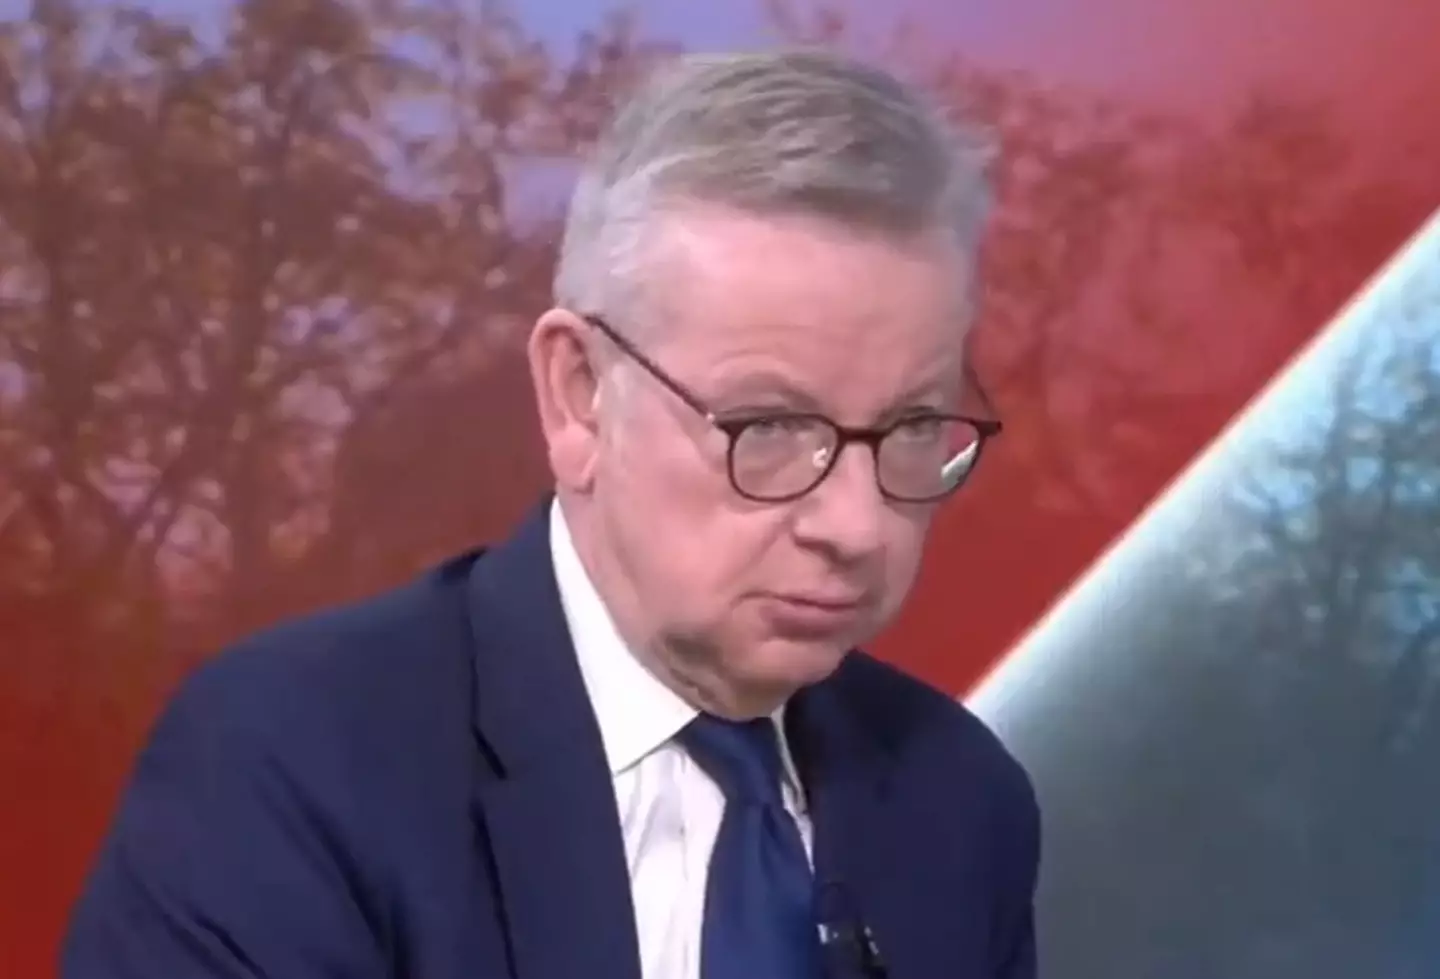 Michael Gove said he regretted his past drug use and had since learned his lesson.